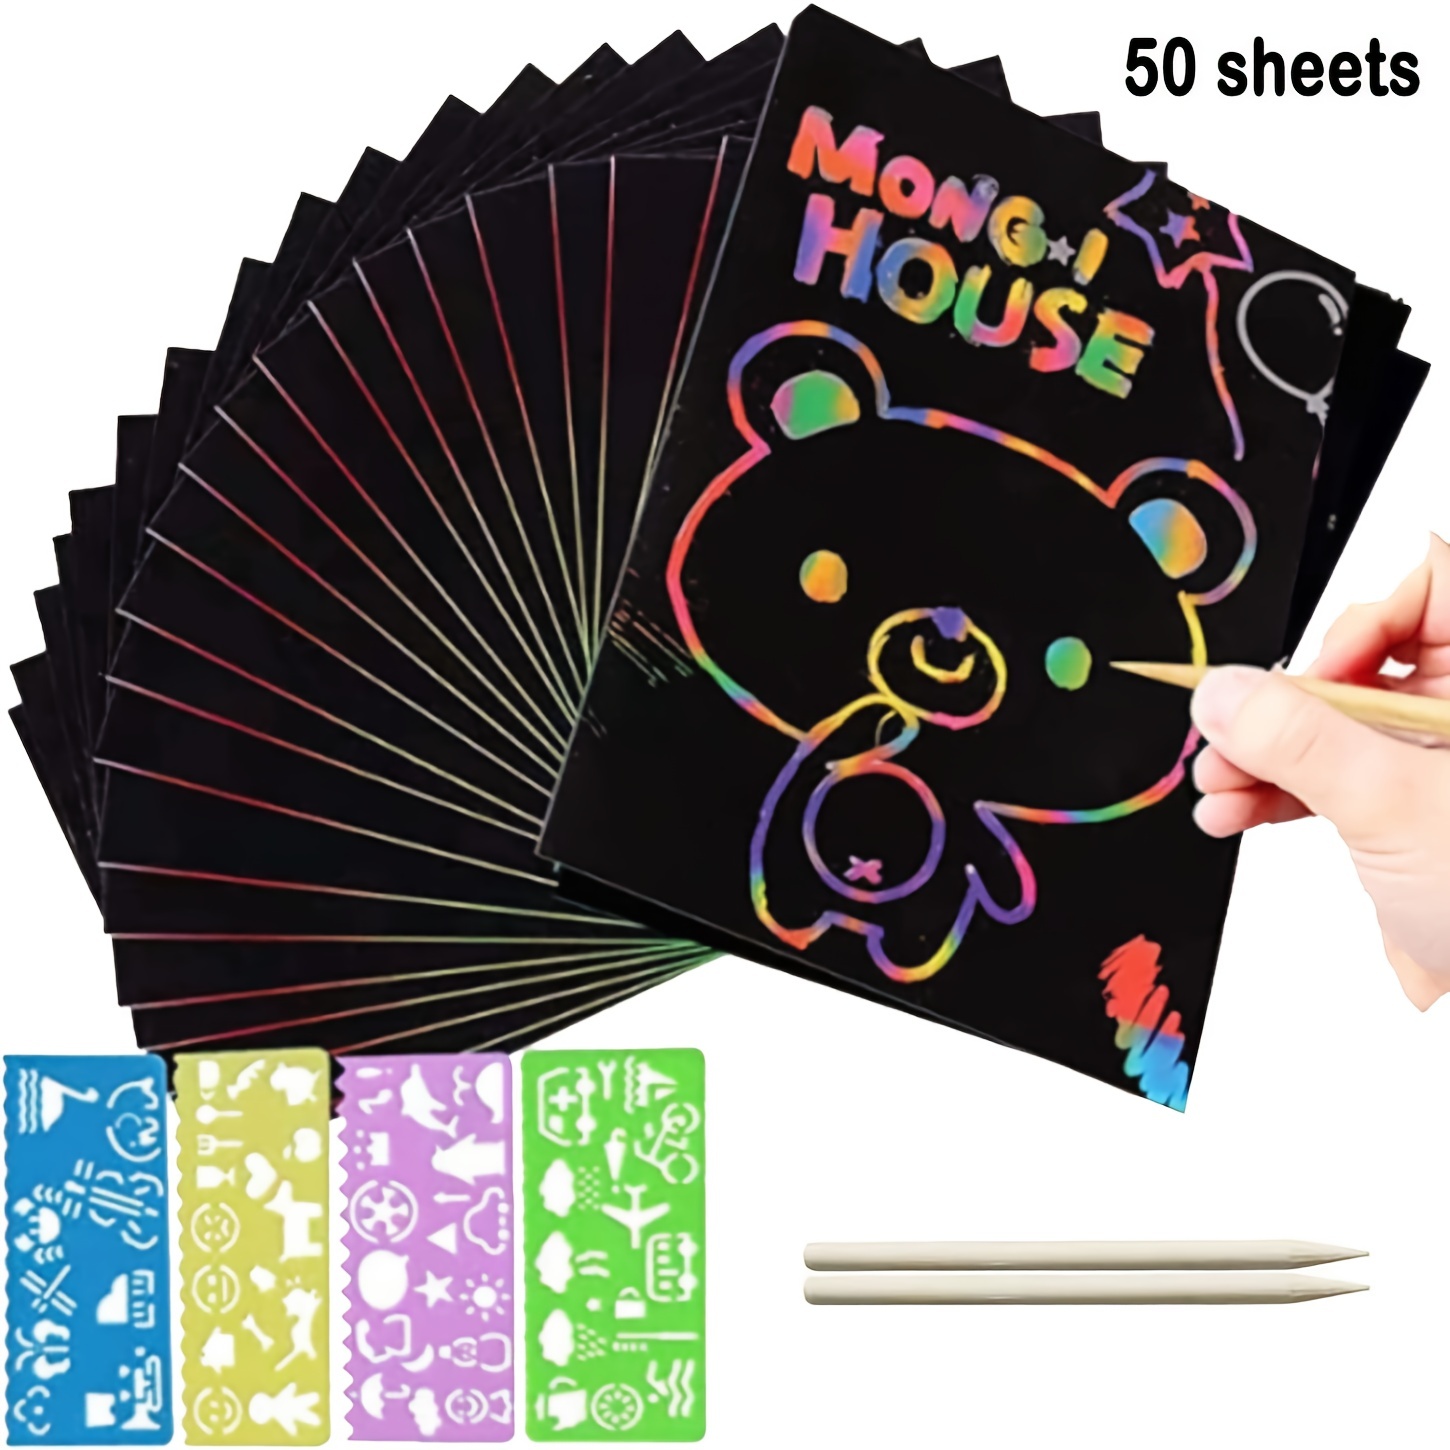 Scratch Paper Set for Kids, 50Pcs Rainbow Scratch Art Papers and